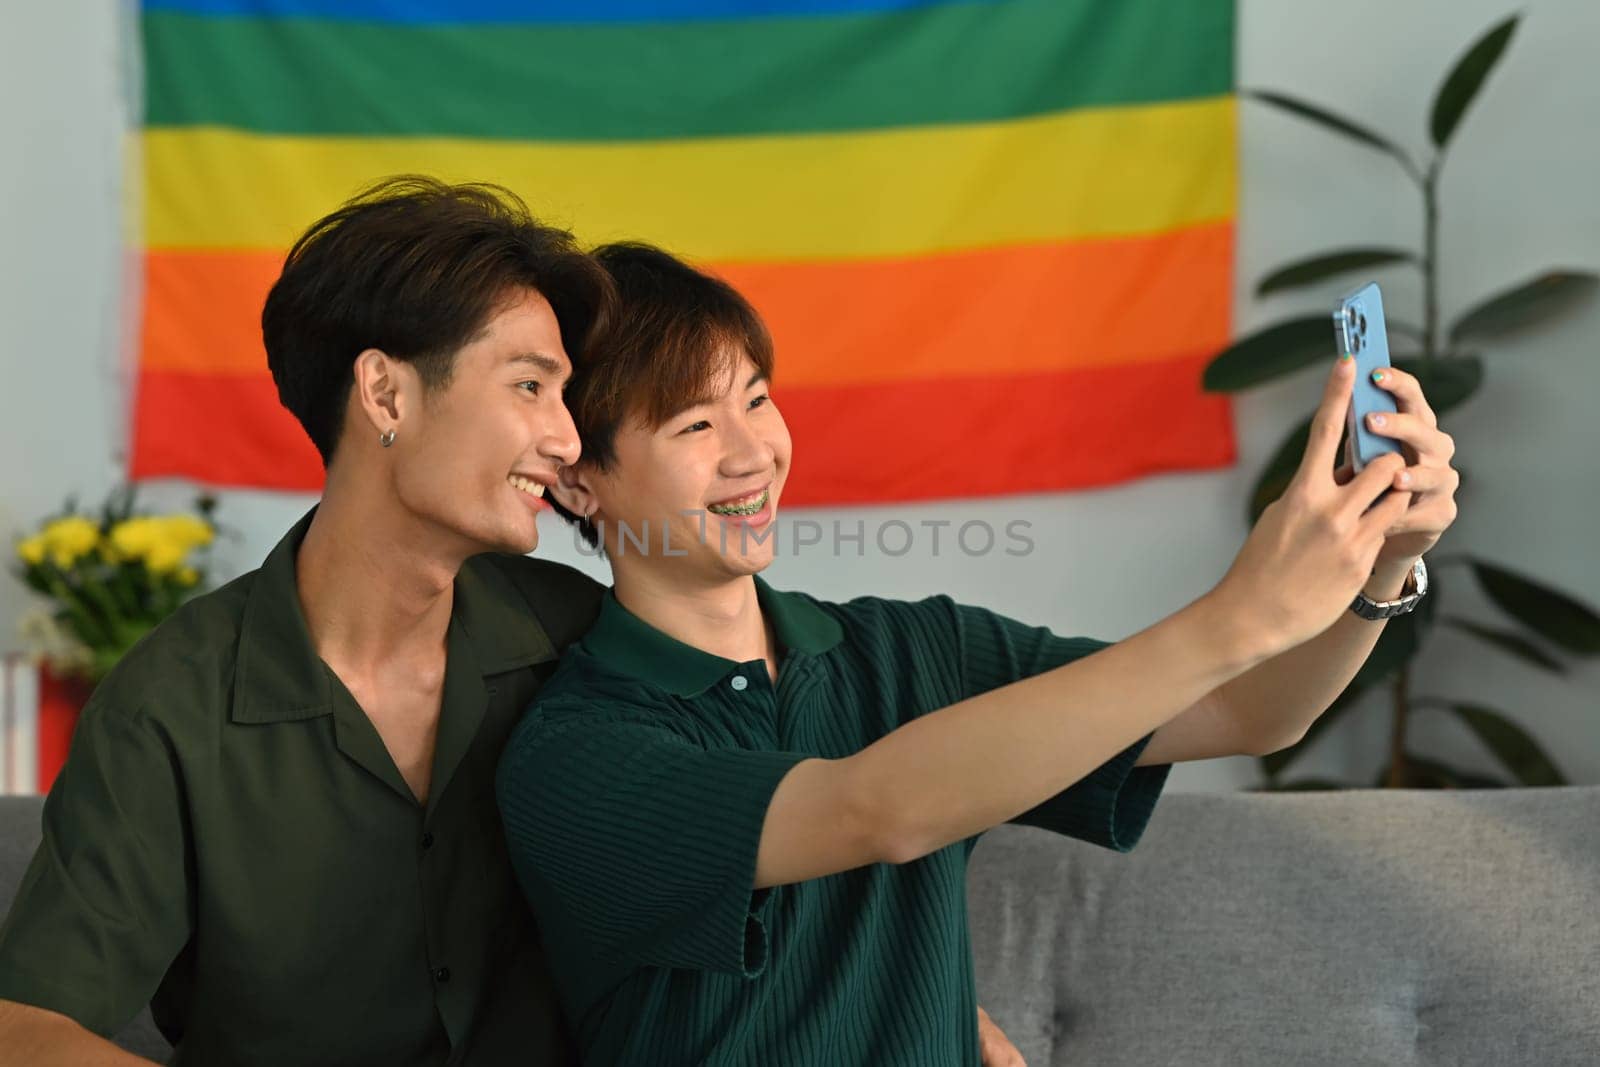 Joyful homosexual couple taking a selfie with smartphone in living room with rainbow flag in background. LGBT and love concept by prathanchorruangsak